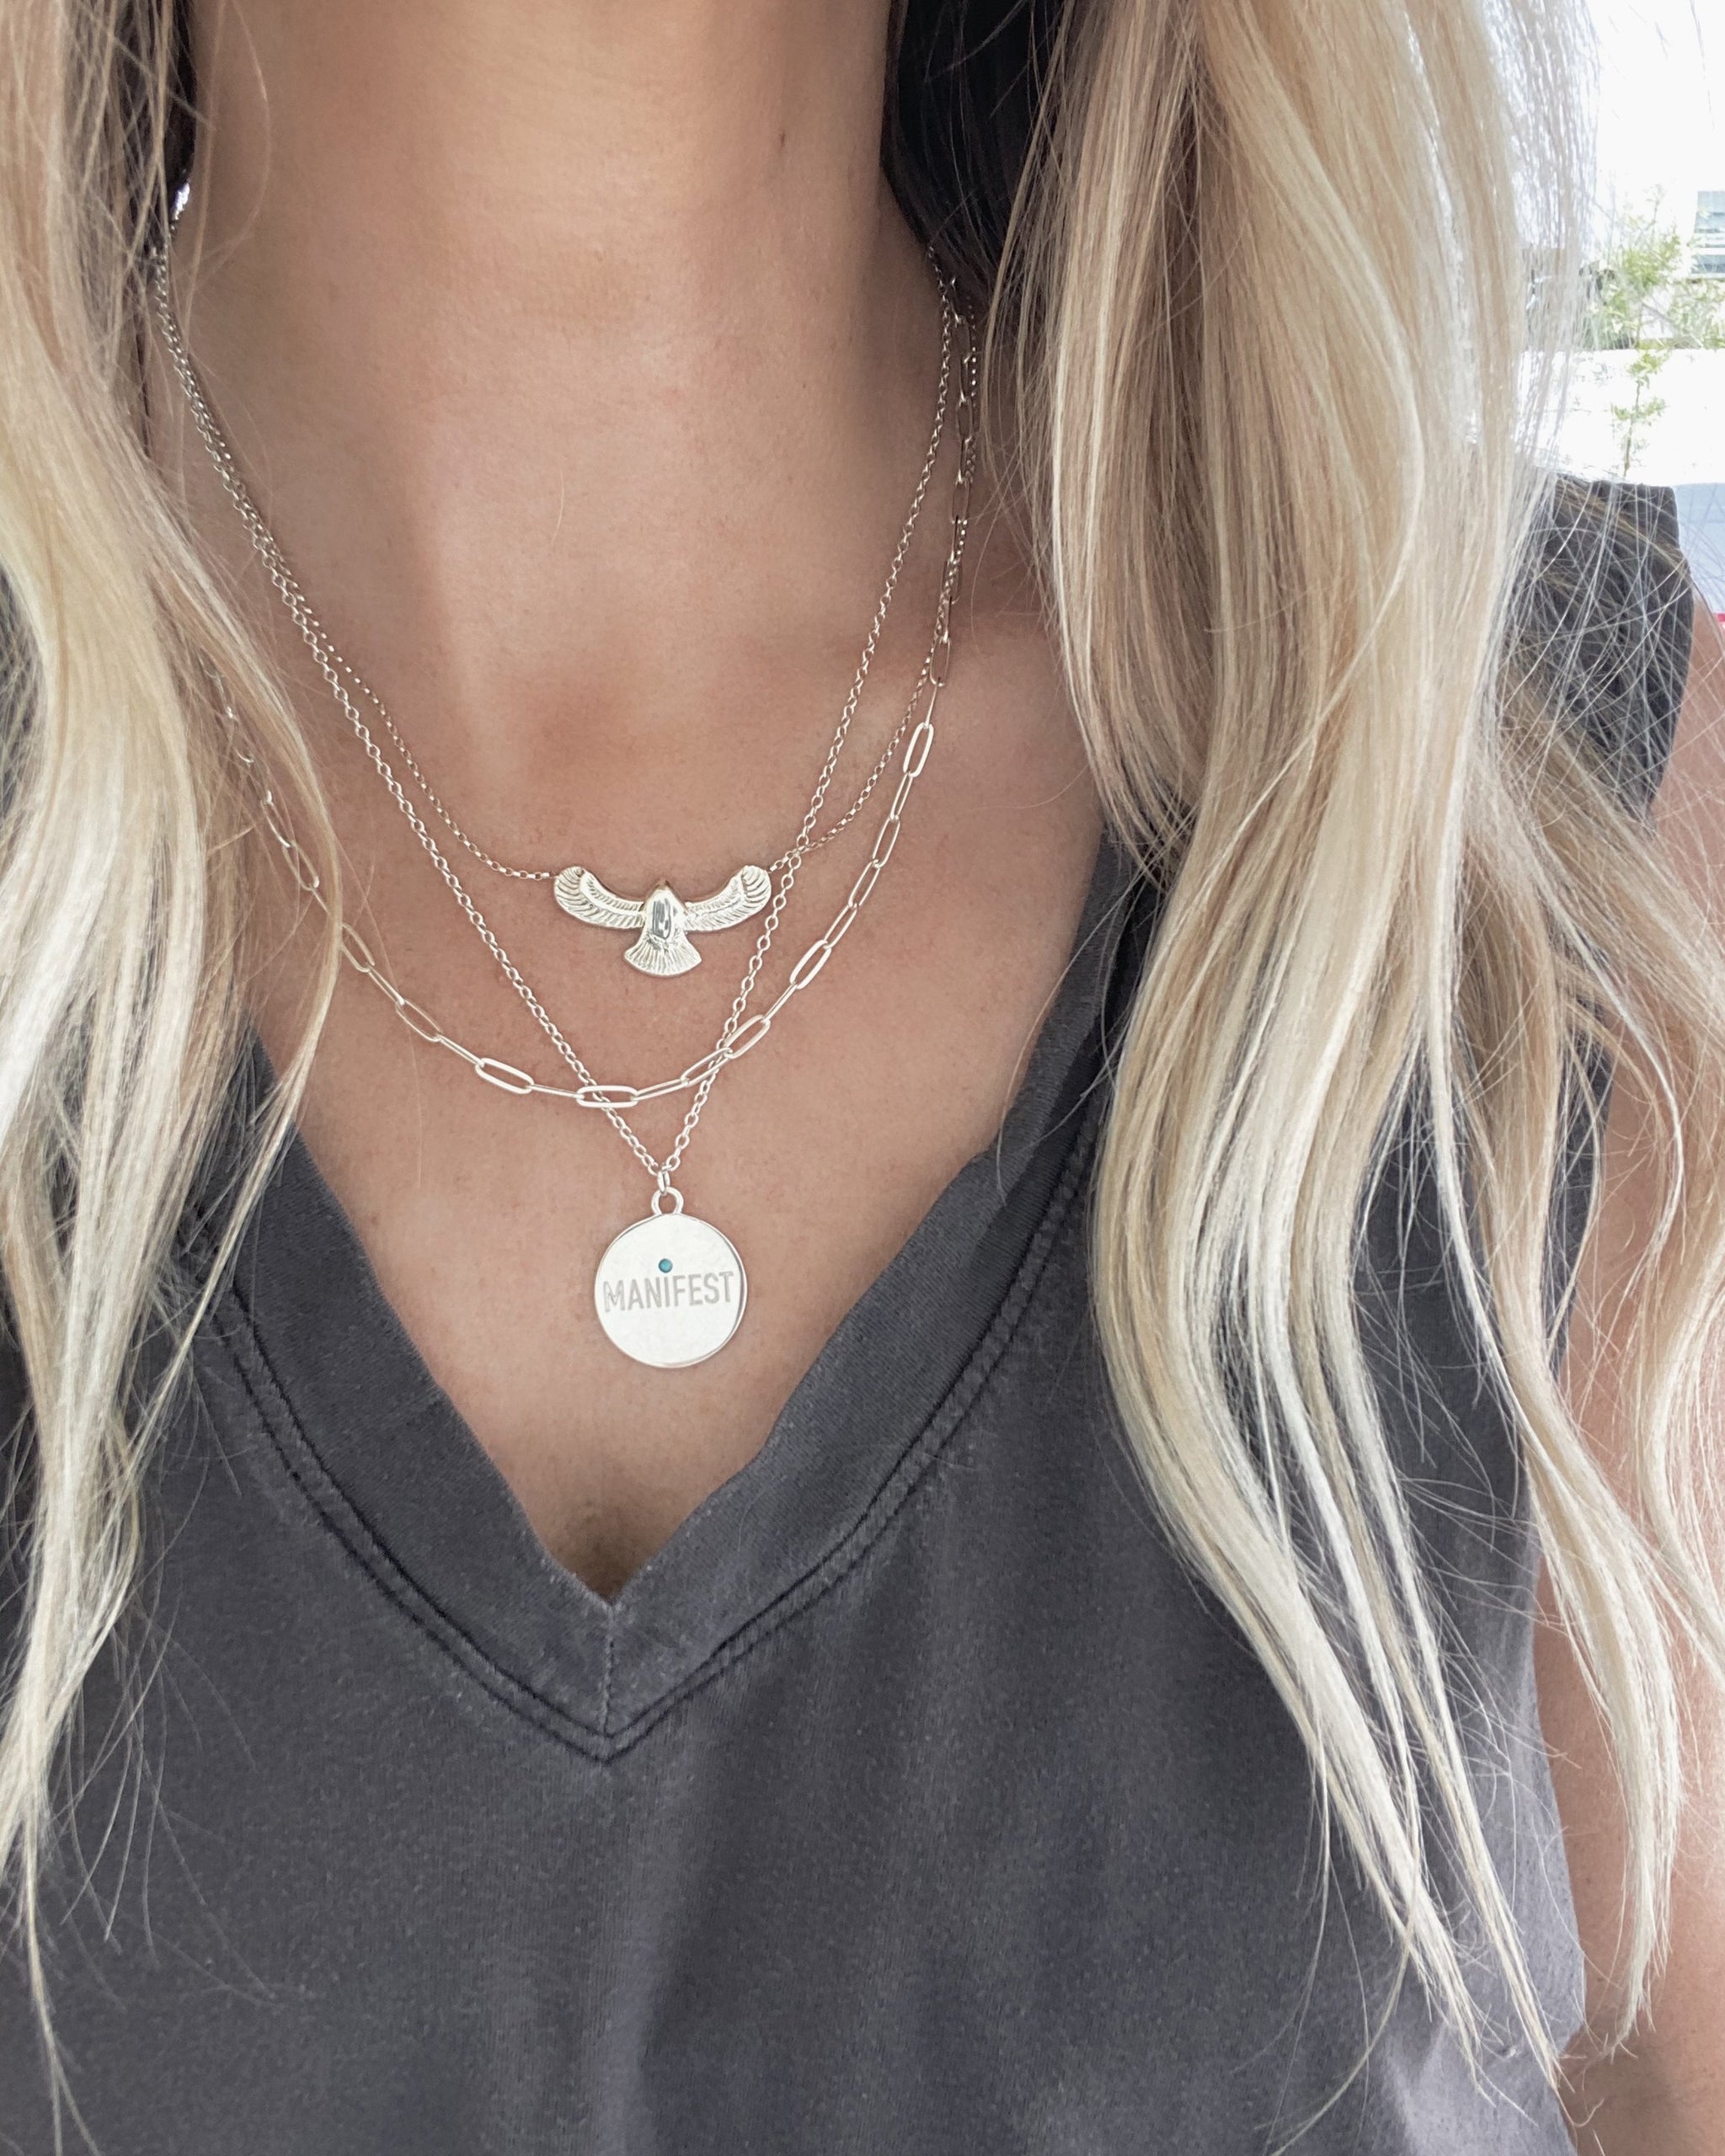 Sterling Silver Fleetwood Necklace, Eagle Pendant on a 16"-18" Sterling Silver Chain, Handmade by Turquoise + Tobacco Jewelry